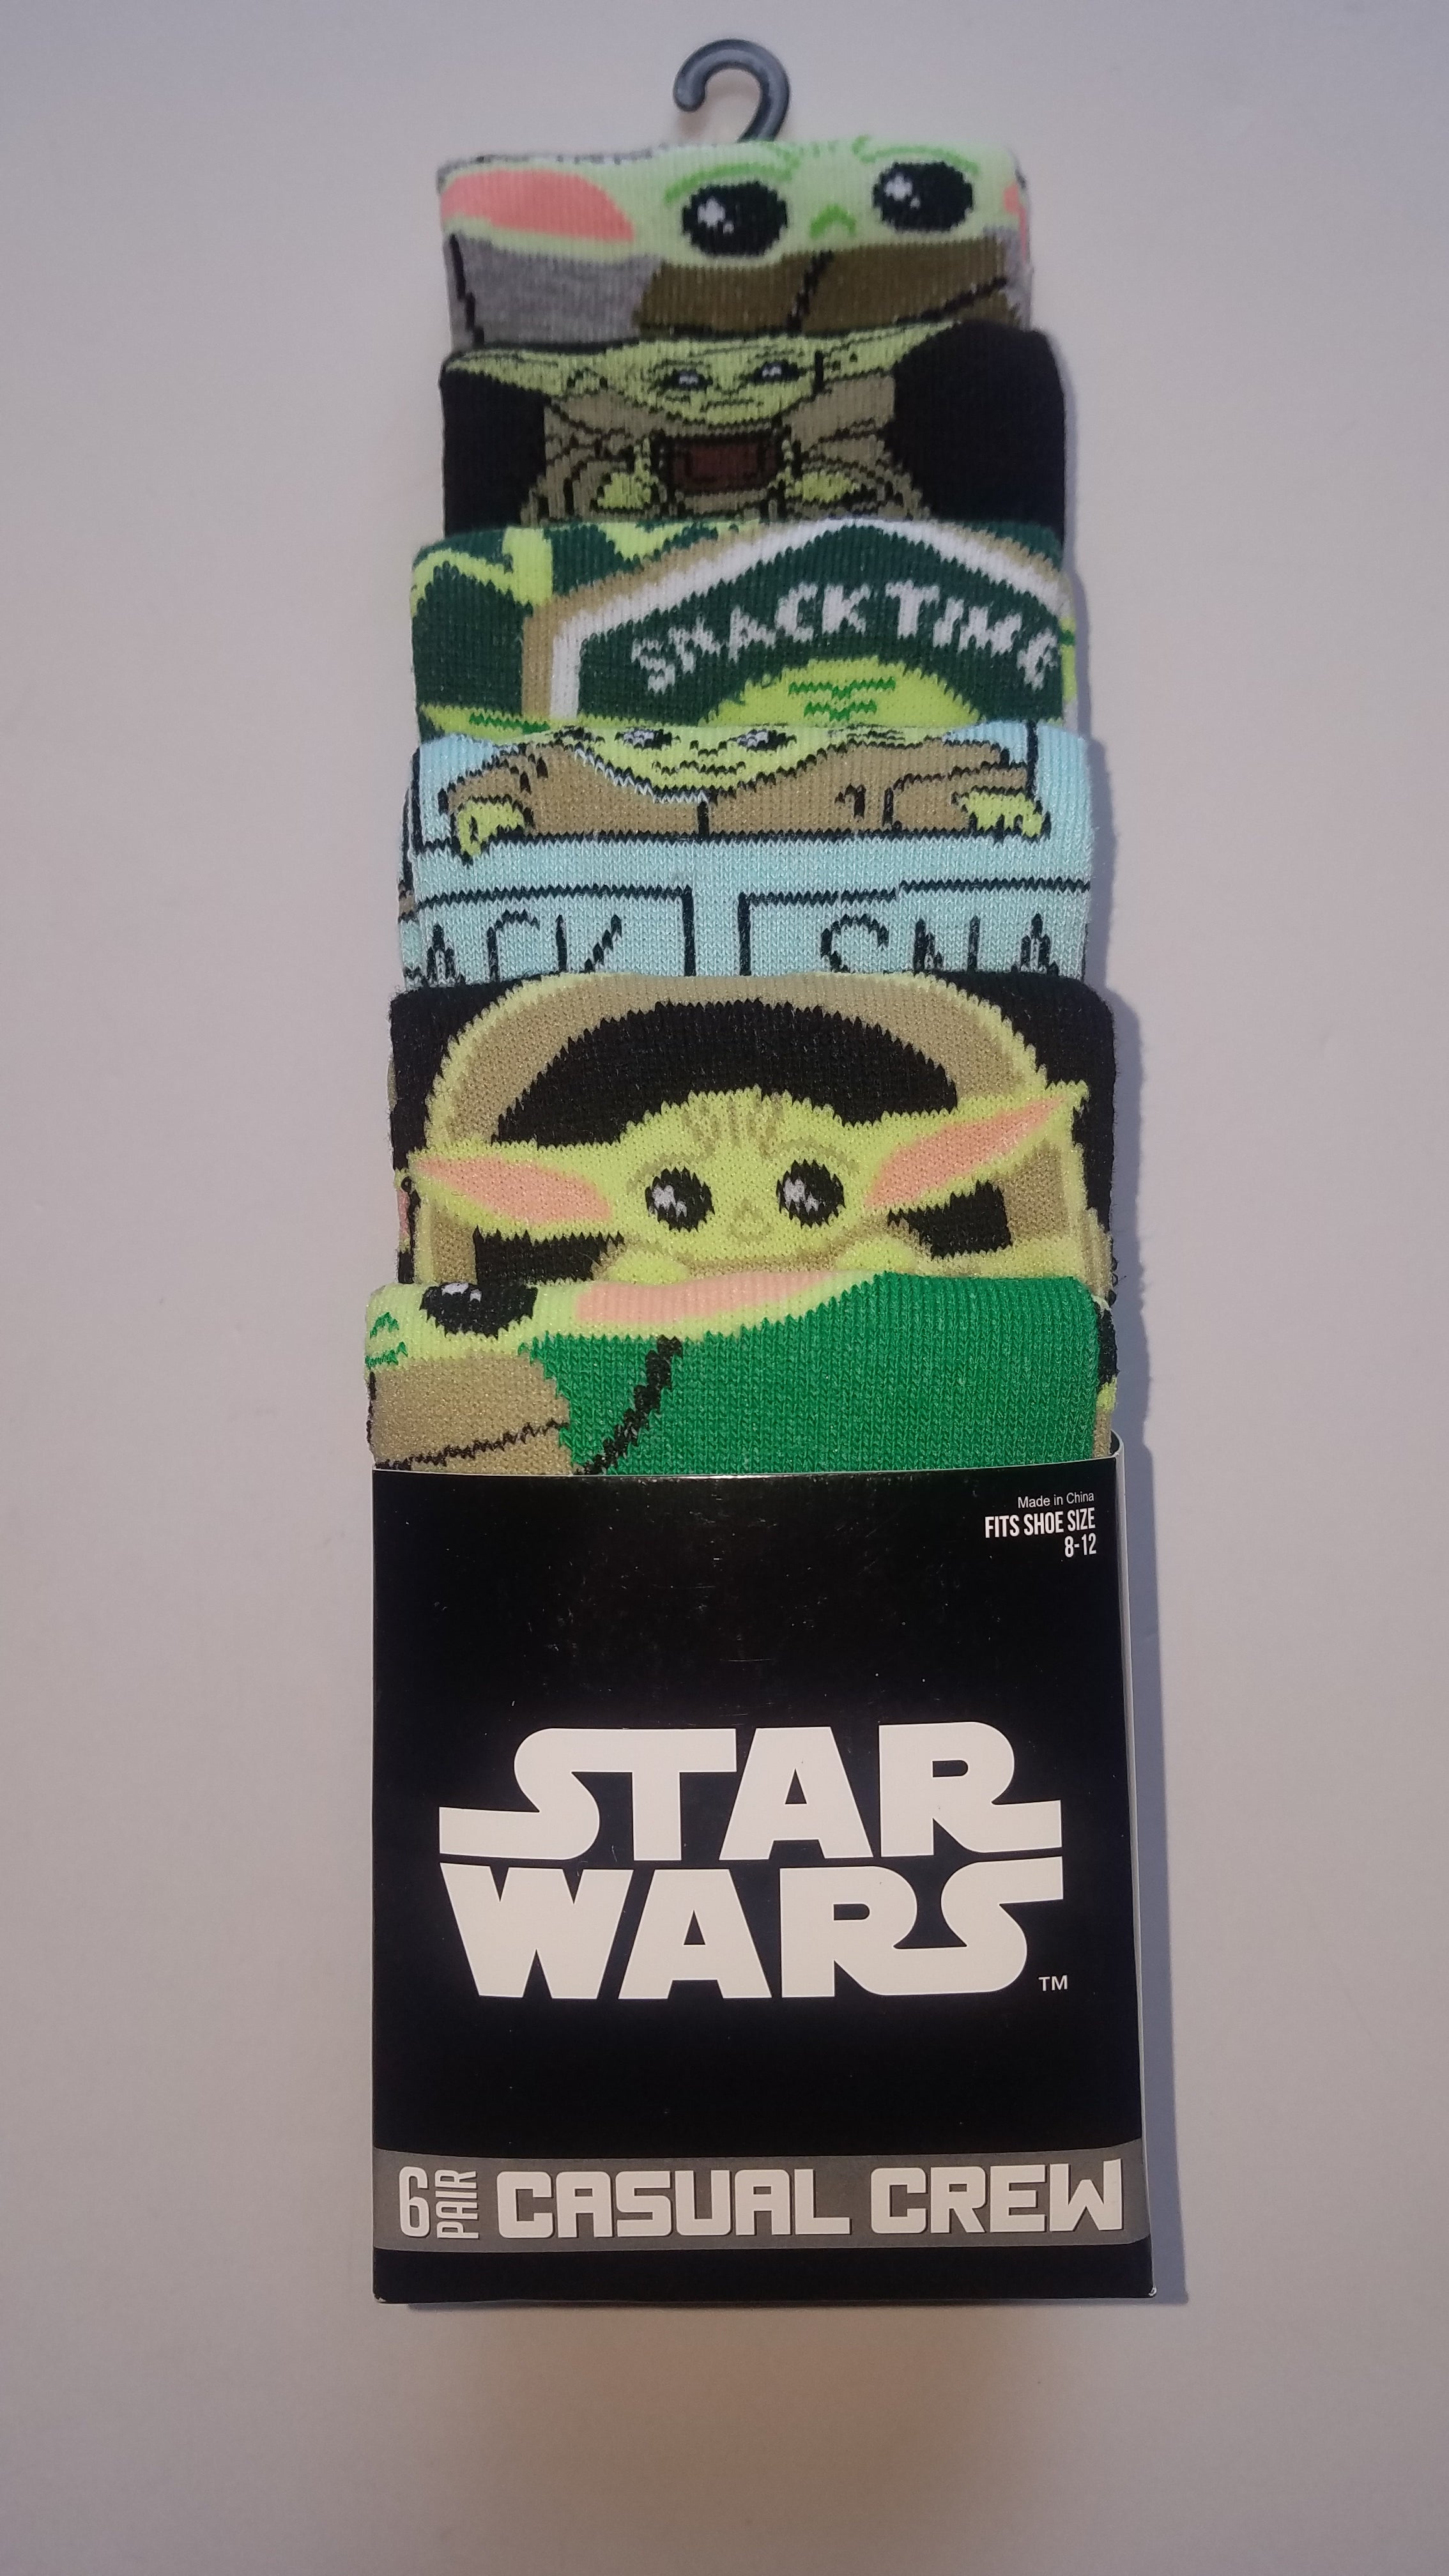 disney star wars the child baby yoda mens casual crew socks 6 pack fits shoe size 8 12